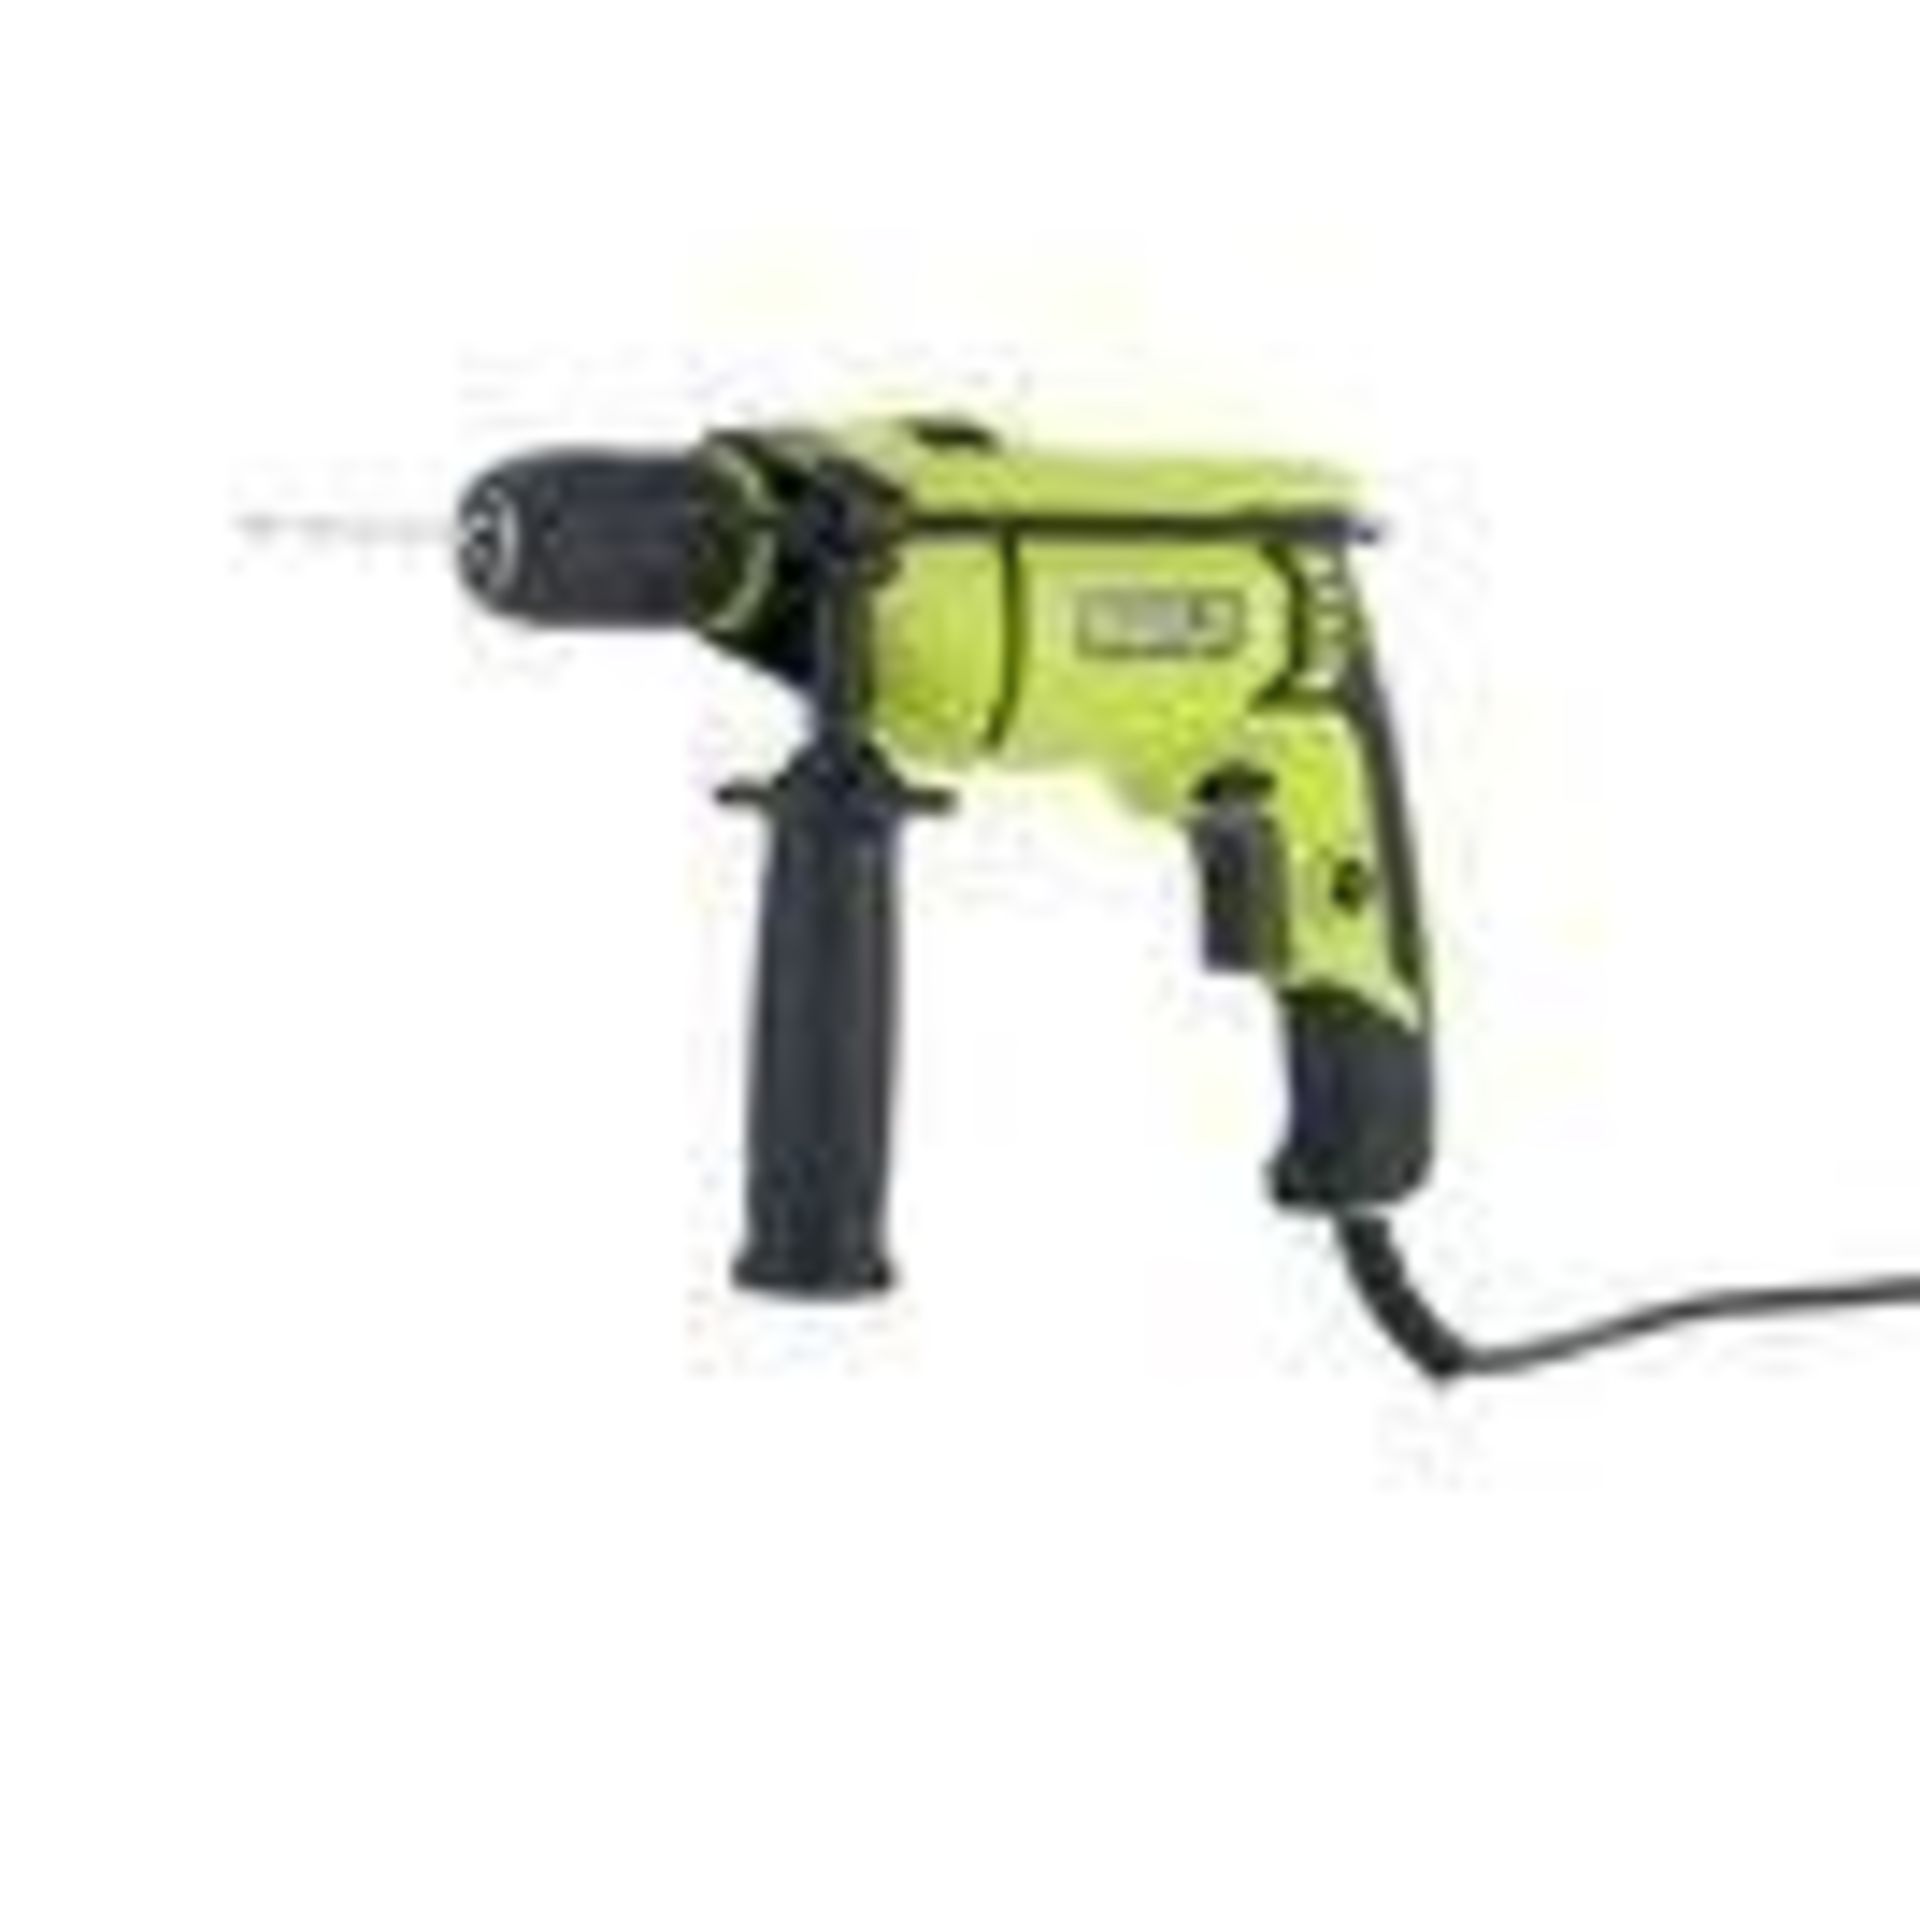 Guild 13mm Keyless High Power Corded Hammer Drill – 750W - £30.00 RRP